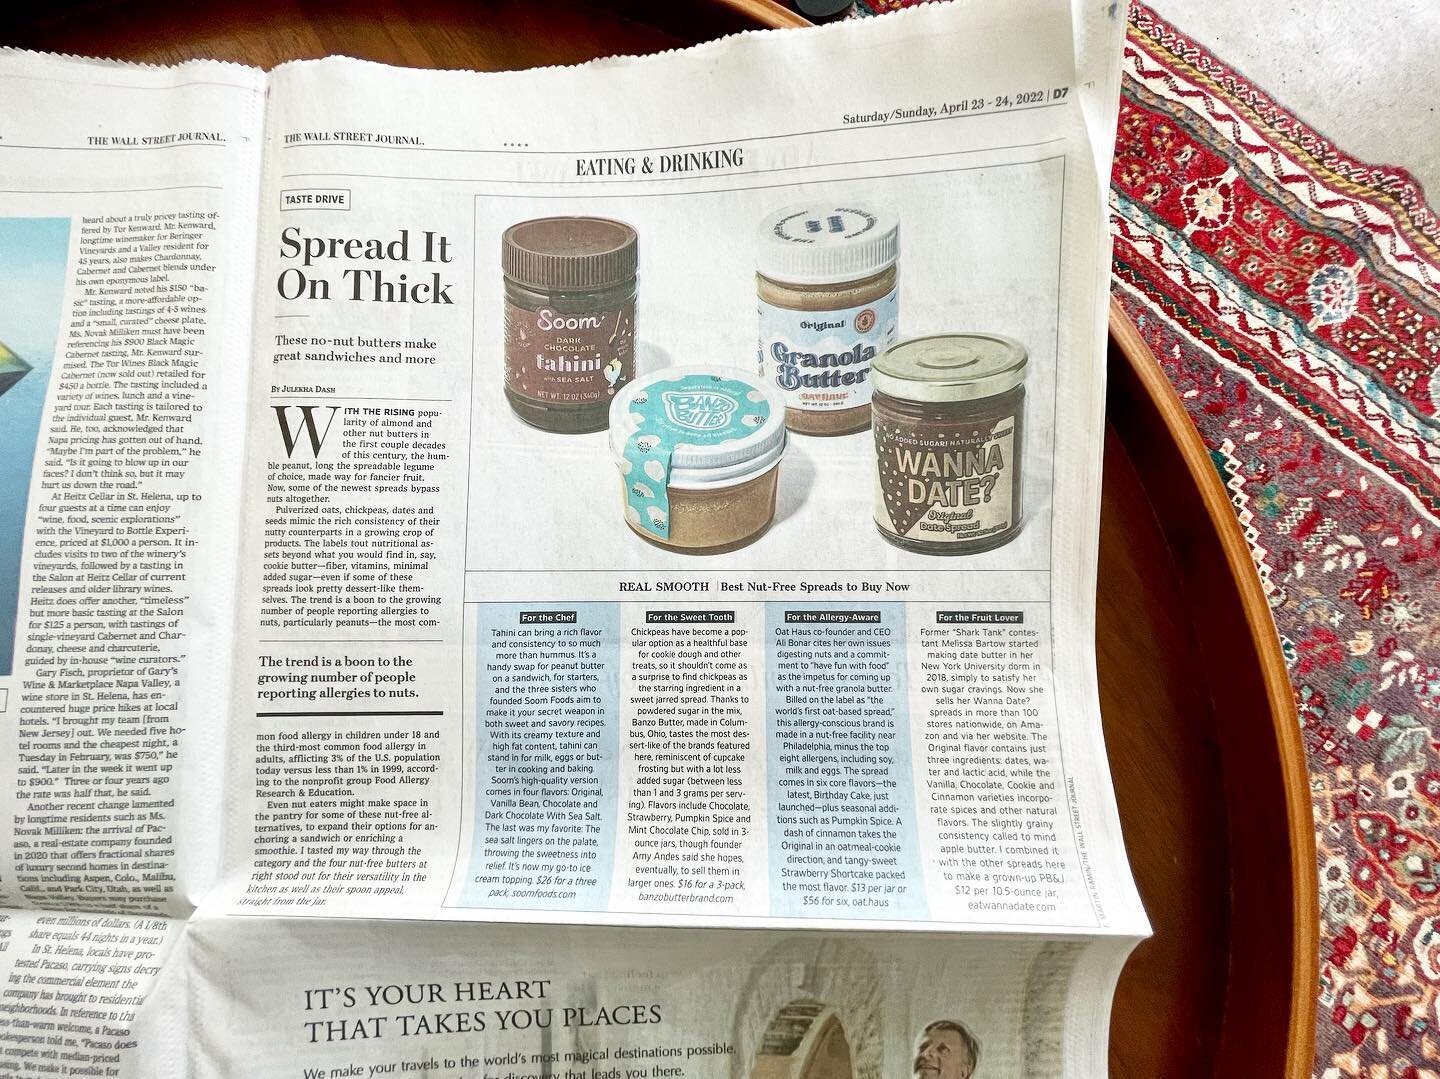 Pretty Big Weekend Over Here

While I was drinking wine and eating charcuterie boards with my best friends, the printers over @wsj were busy making PR and client dreams come true 🥳

In a time when more and more long-standing, iconic print publicatio